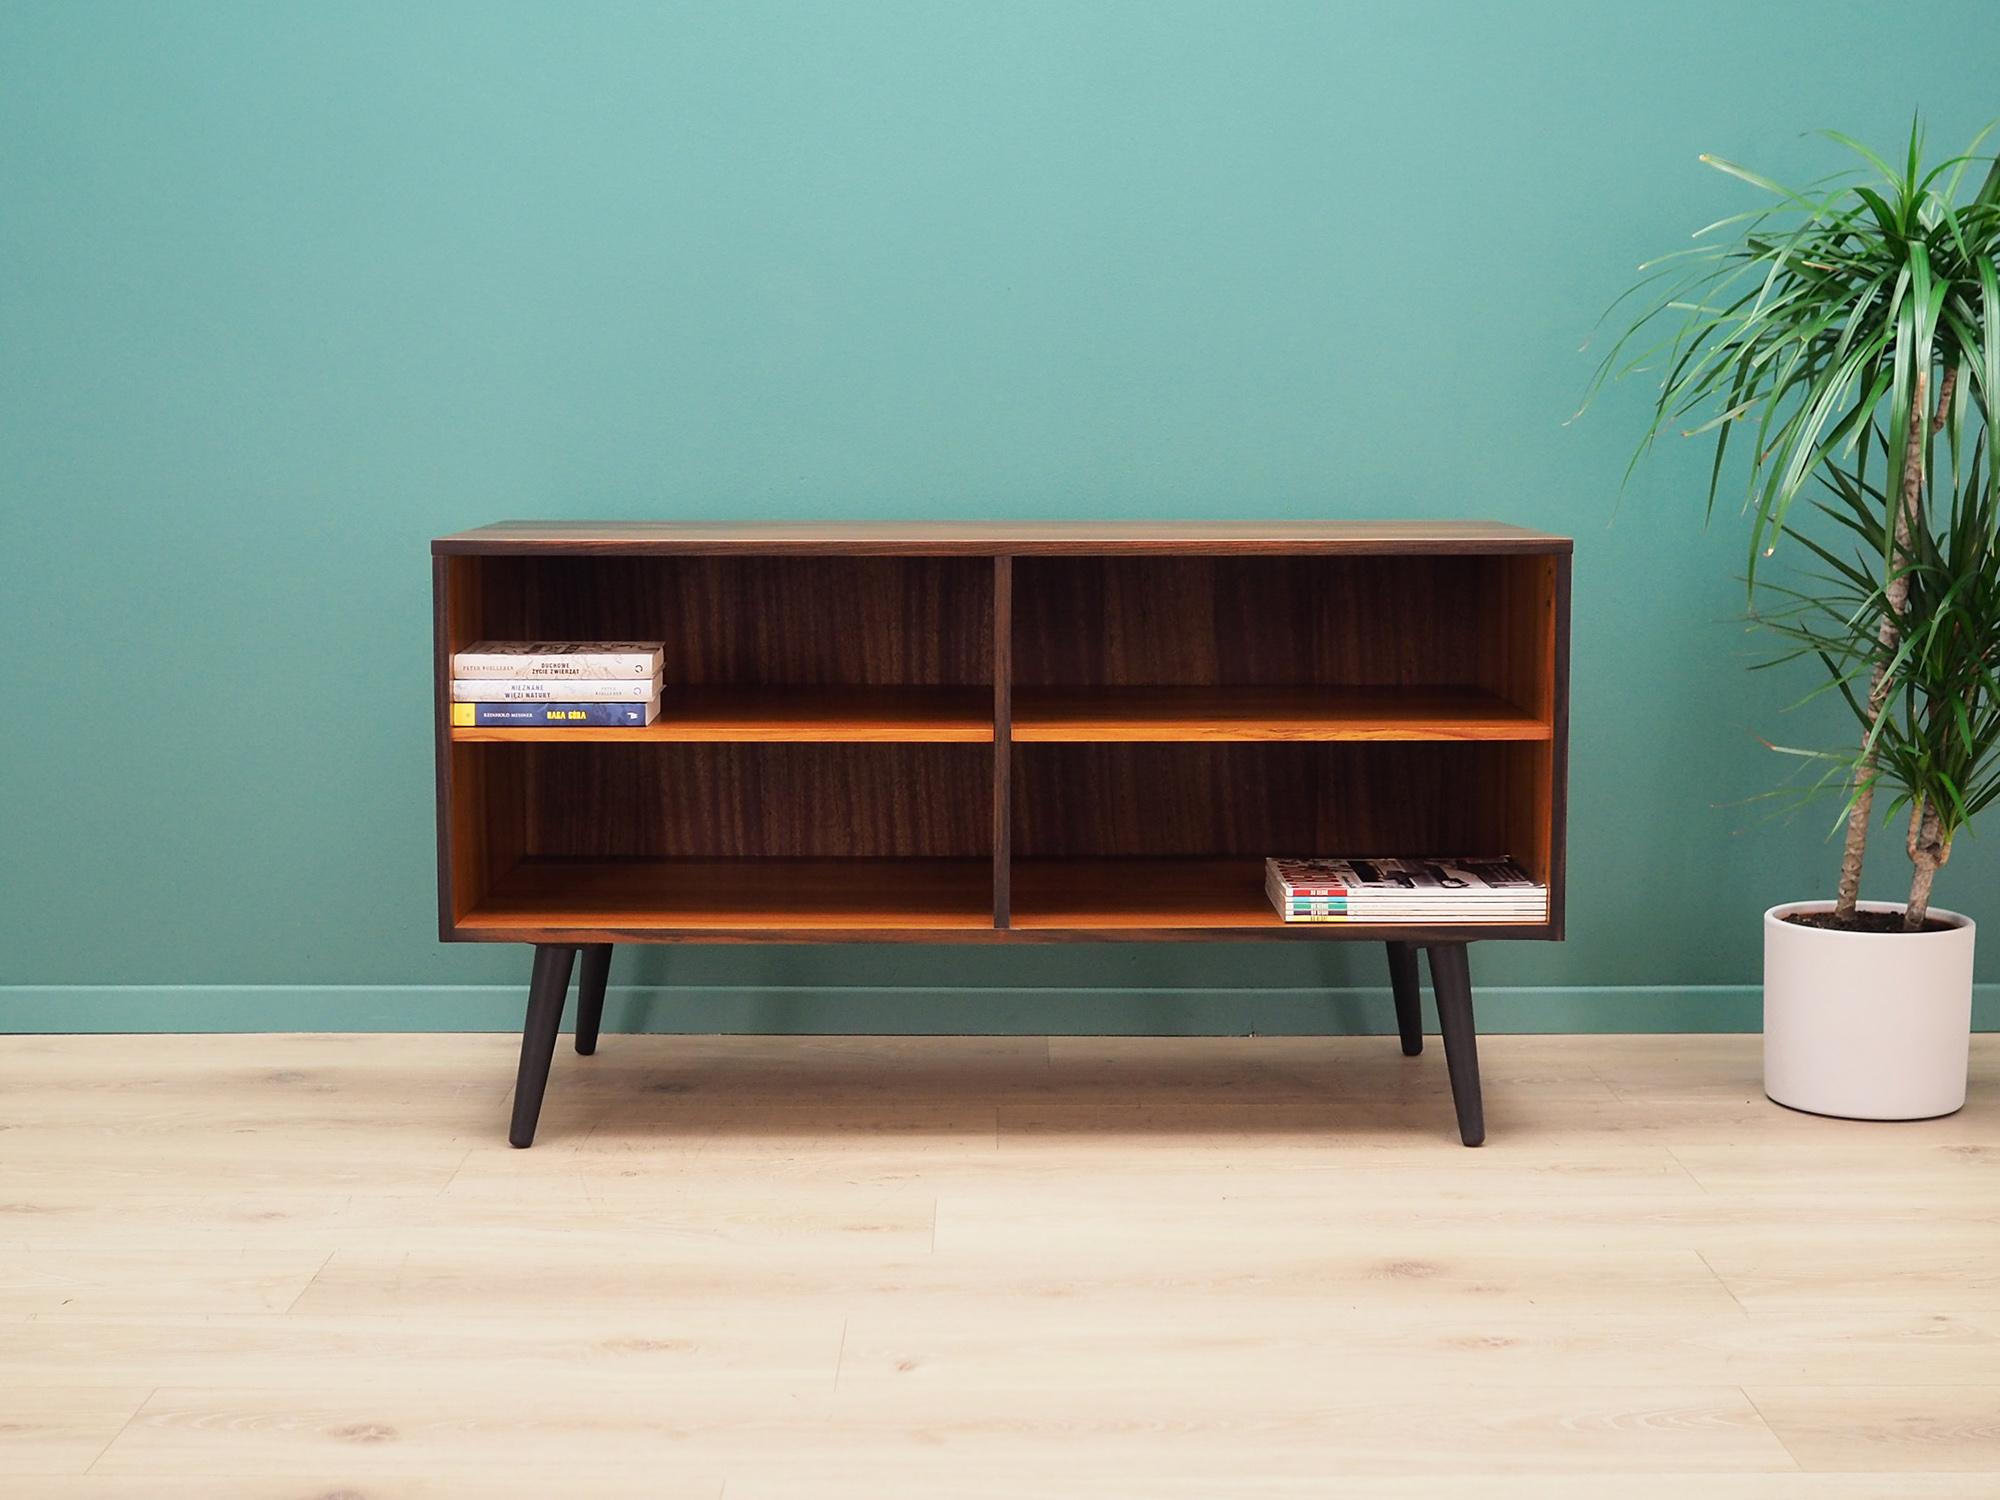 Cabinet was made in the 1960s, Danish production.

The construction is covered with rosewood veneer. Legs made of solid wood stained black. The surface after refreshing. Inside the space has been filled with practical shelves with adjustable